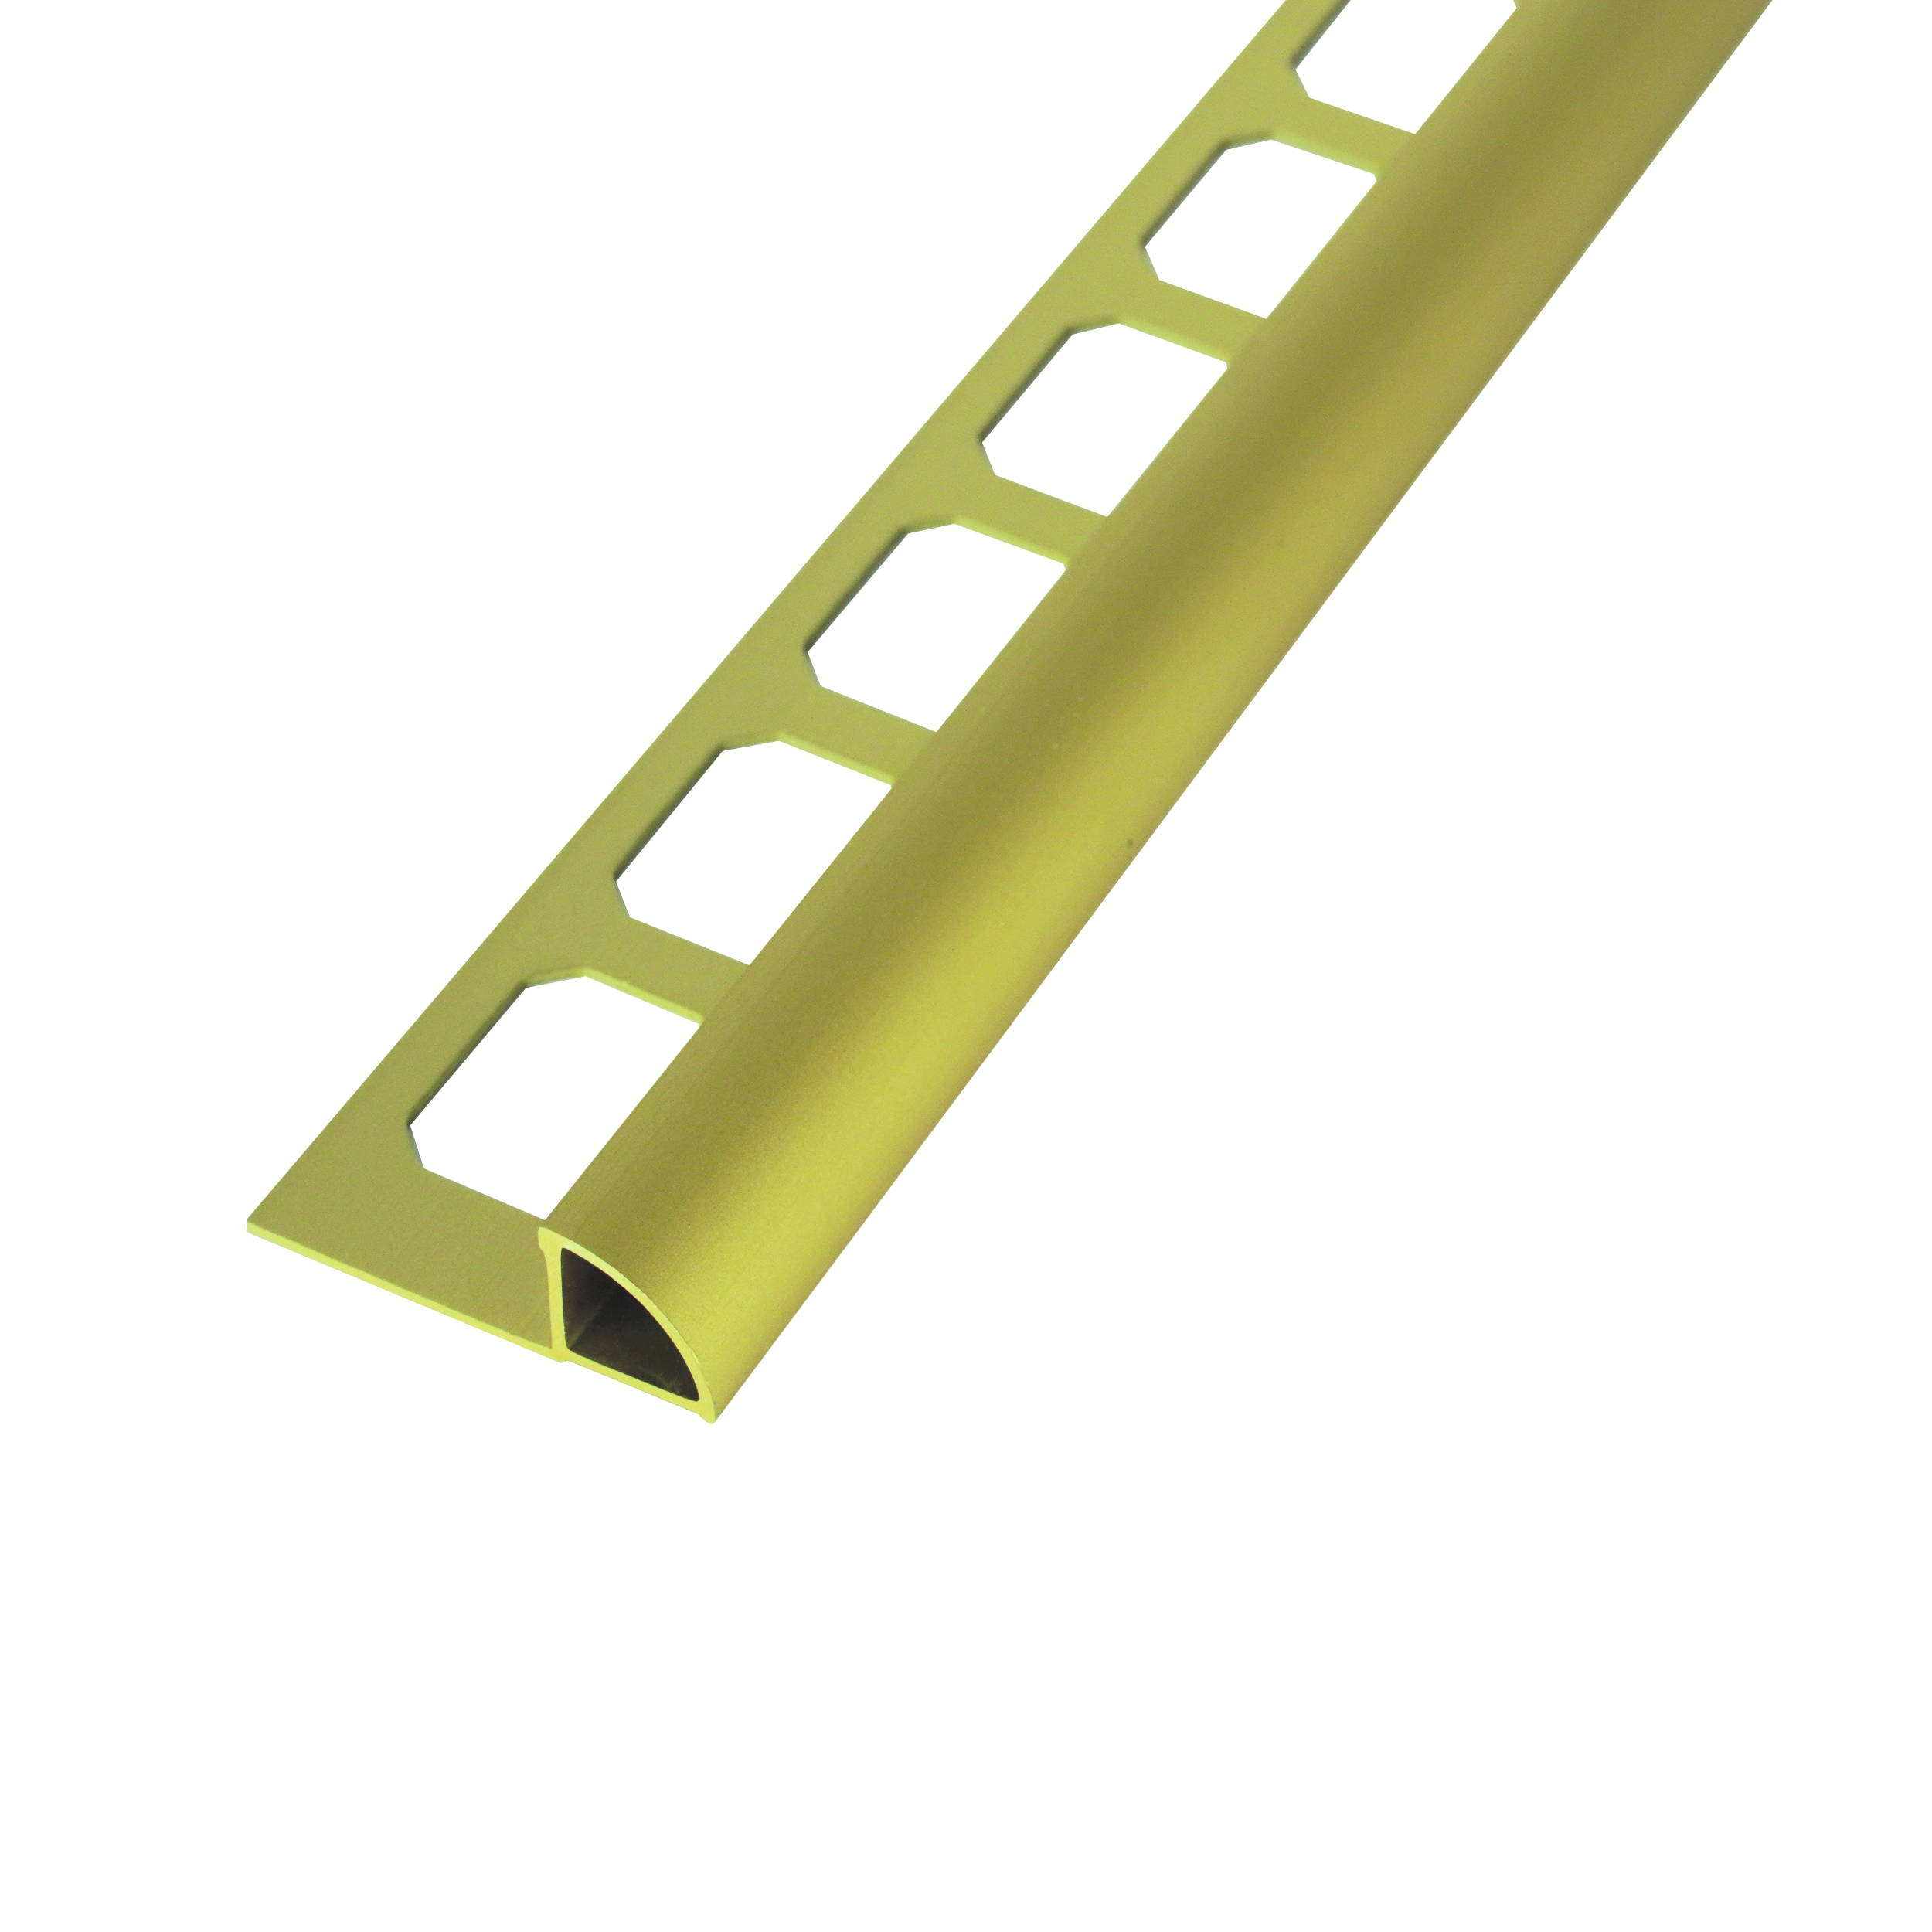 https://cdnmdm.laticrete.com/ProductAssets/Objects%20Assets/Round_Edge_Profiles_made_of_Brass_RO9.png